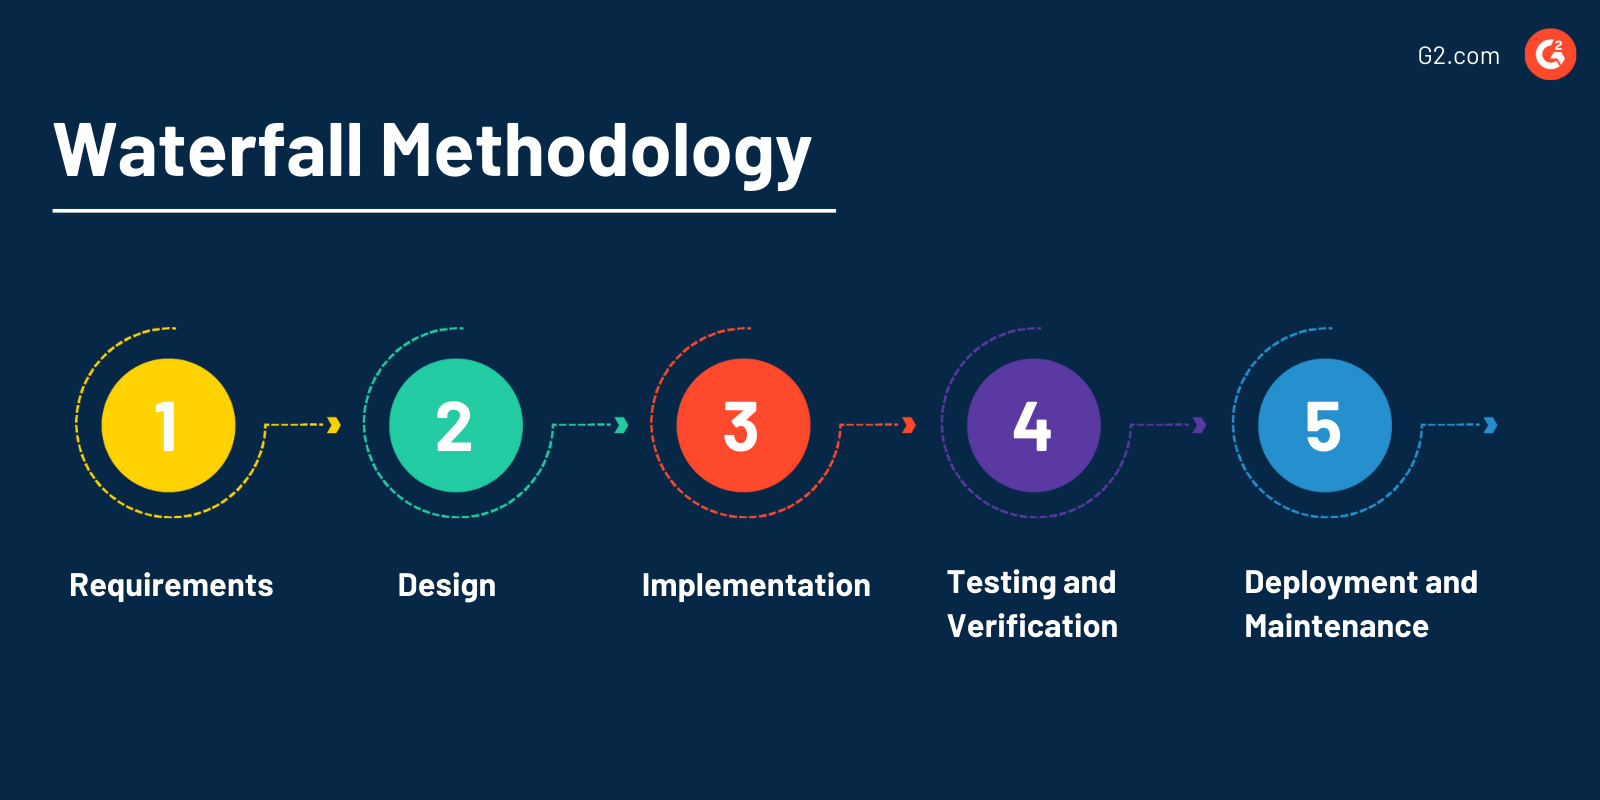 Waterfall Methodology: How to Use It for Your Next Big Project